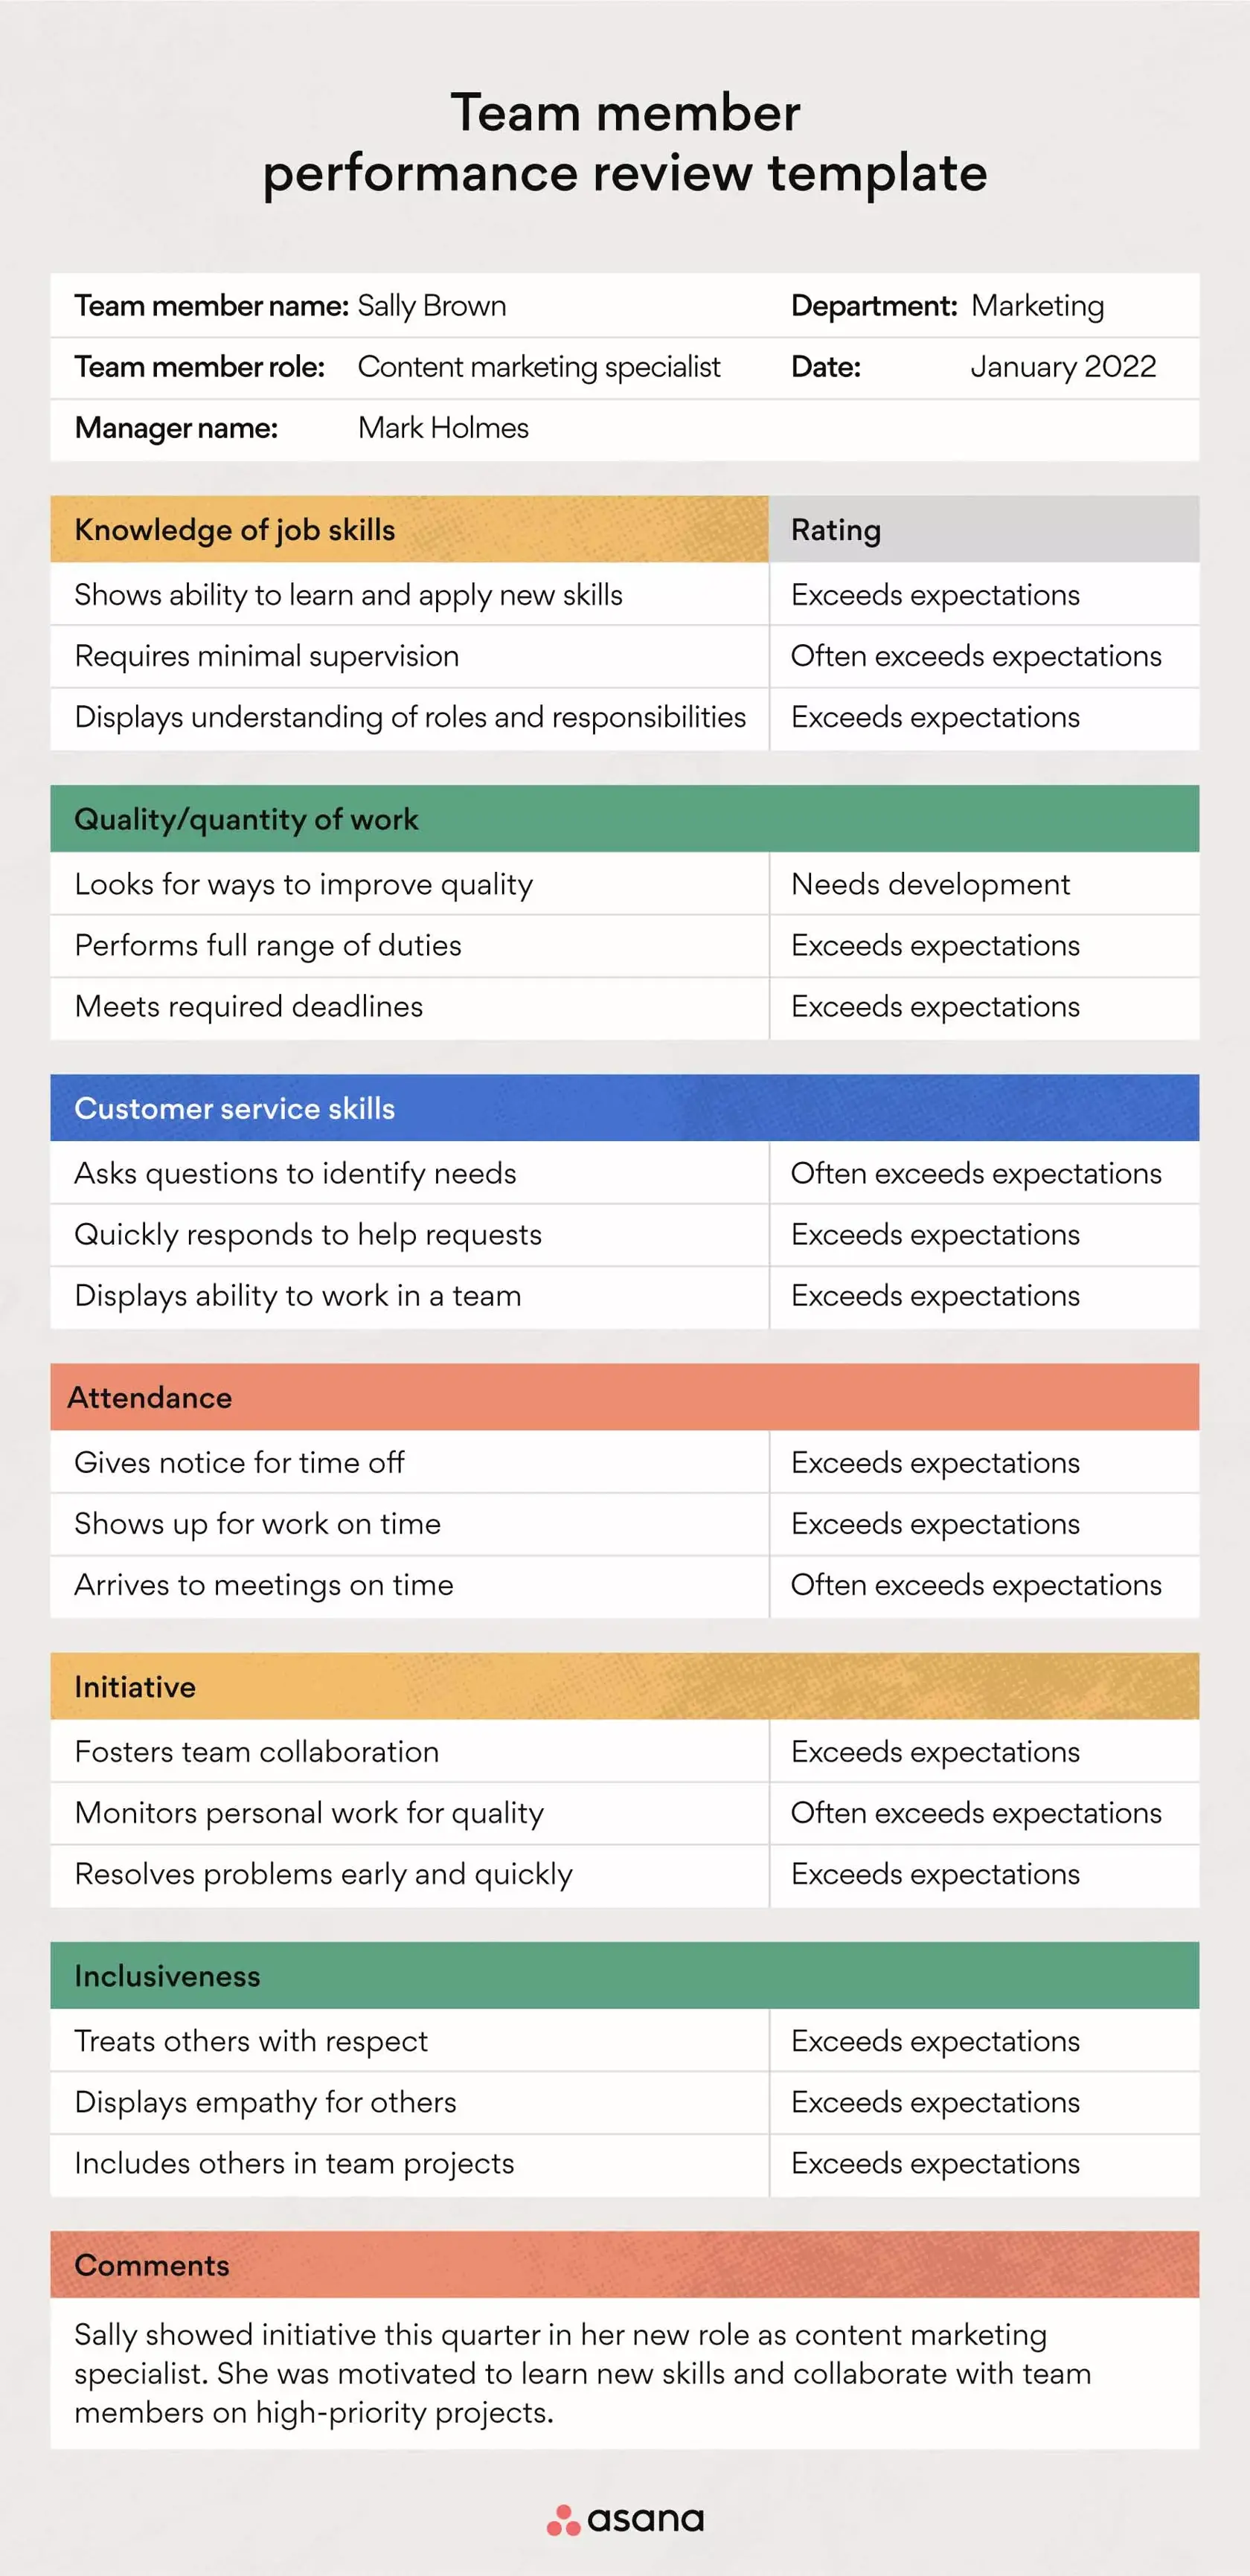 [inline illustration] team member performance review template (example)